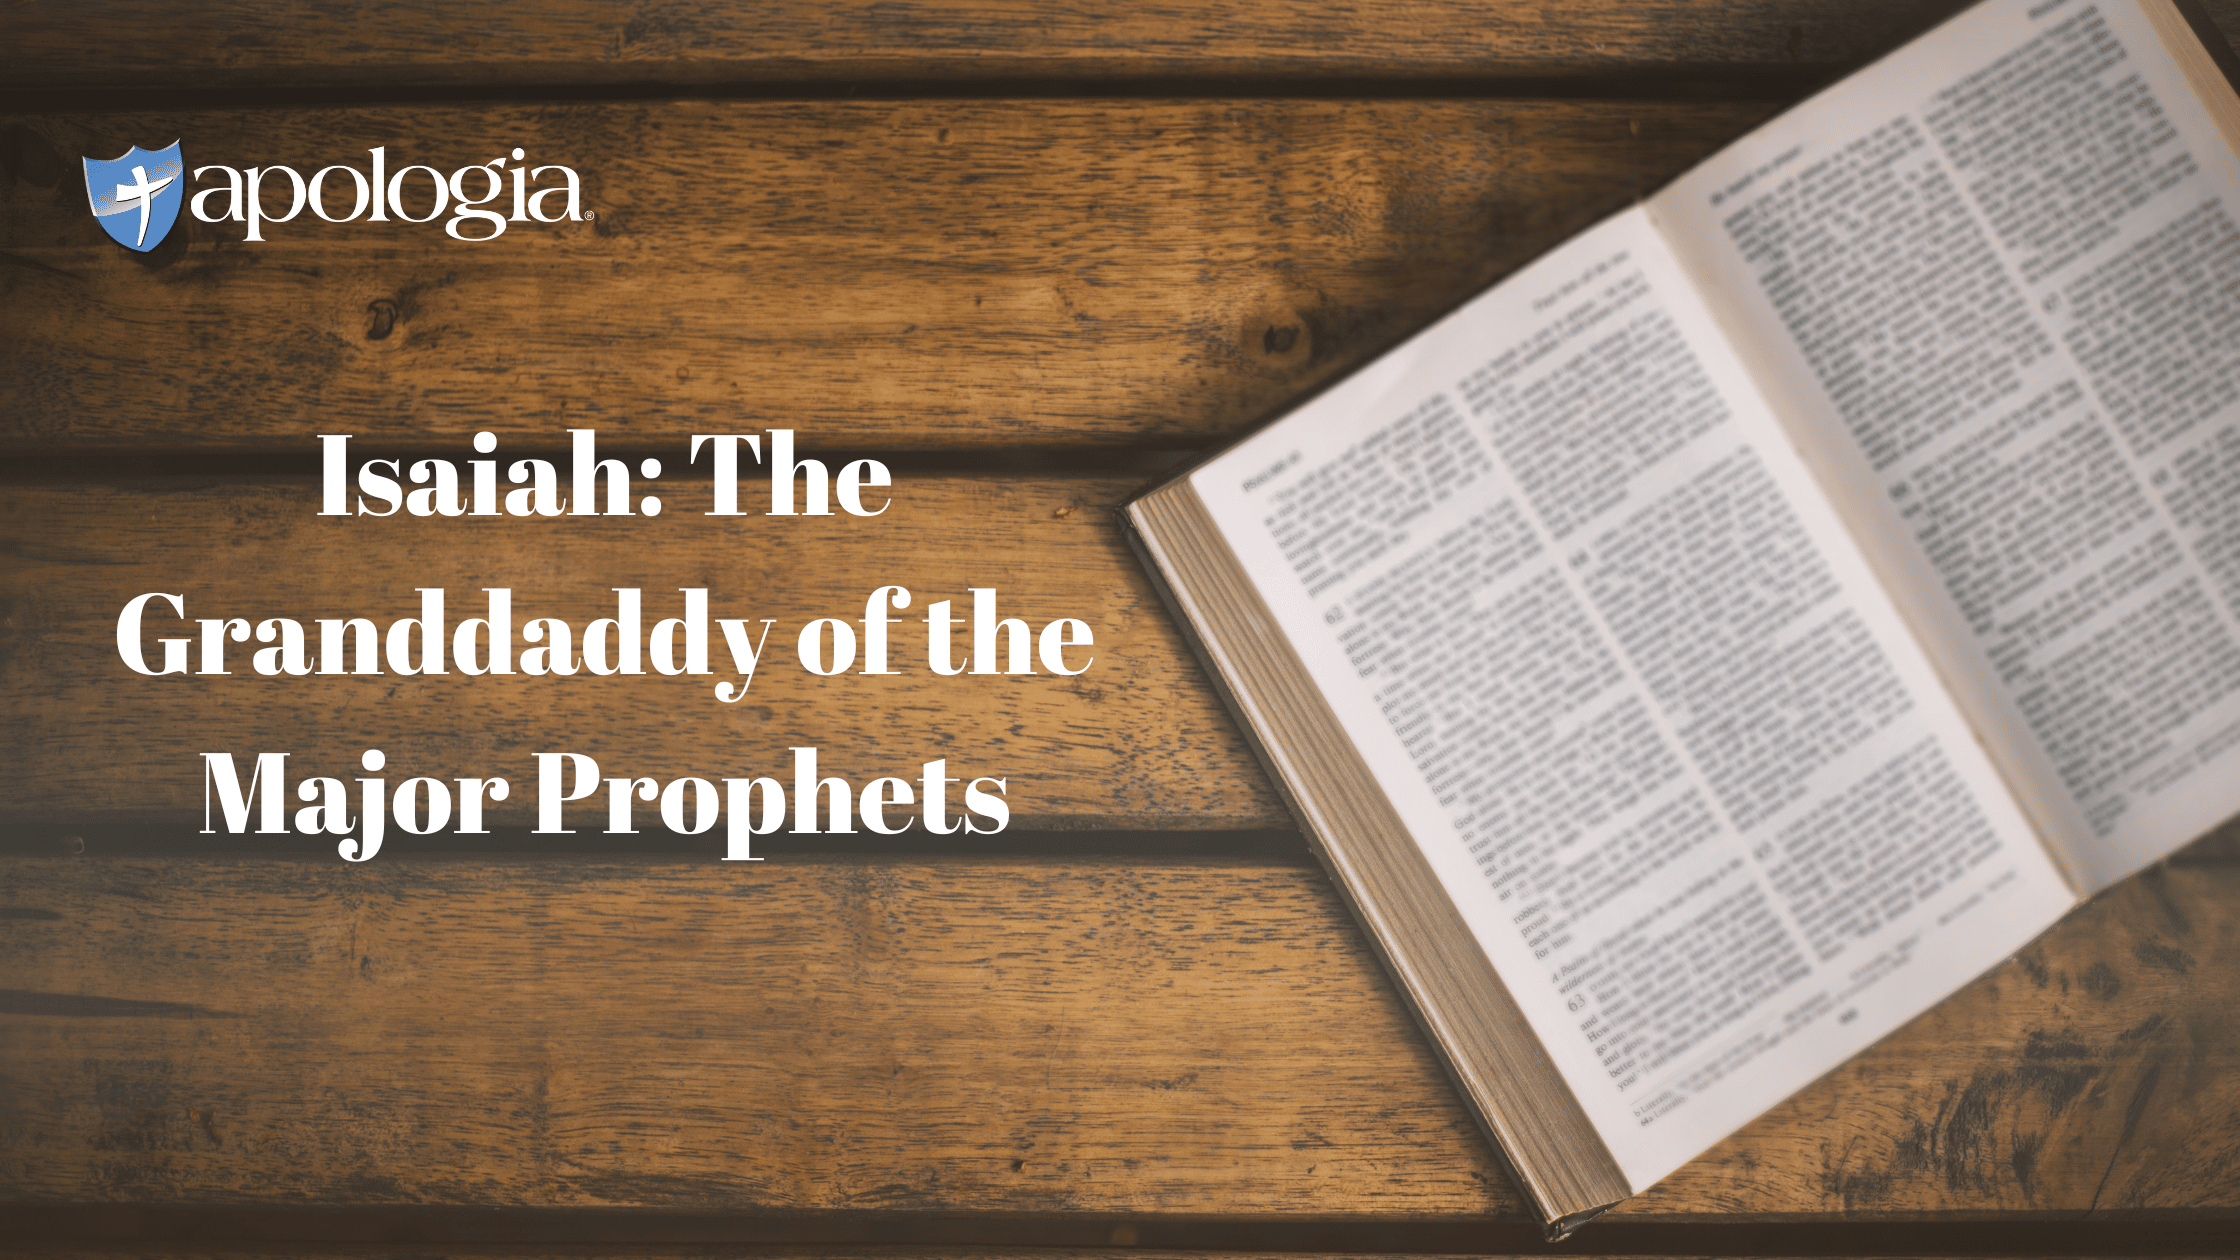 Isaiah: The Granddaddy of the Major Prophets